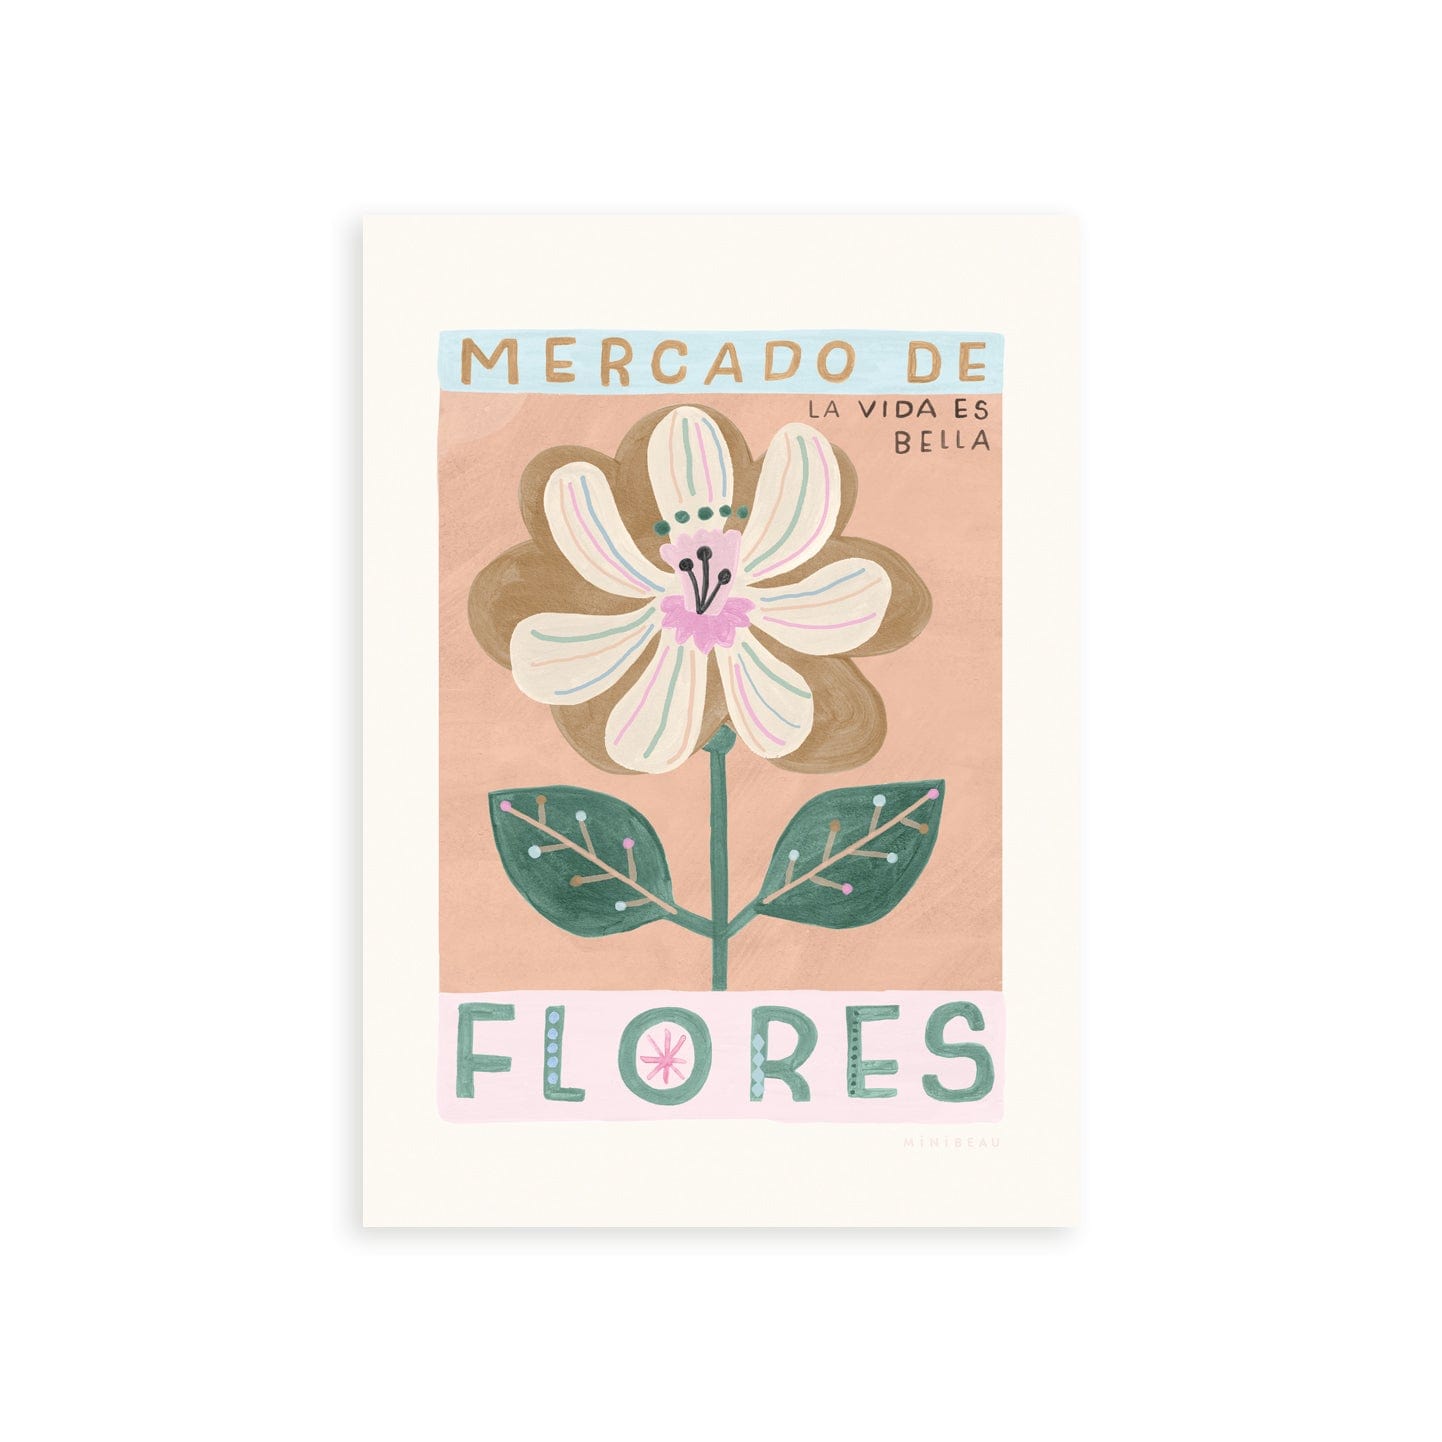 Our Mercado de Flores art print drawn in a vintage style features alarge cream flower with pink and blue veins and 2 leaves on the stem on a pink background. With MERCADO DE on a blue background, and  FLORES on a cream background, in large font and LA VIDA ES BELLA in small text on a terracotta and cream background.